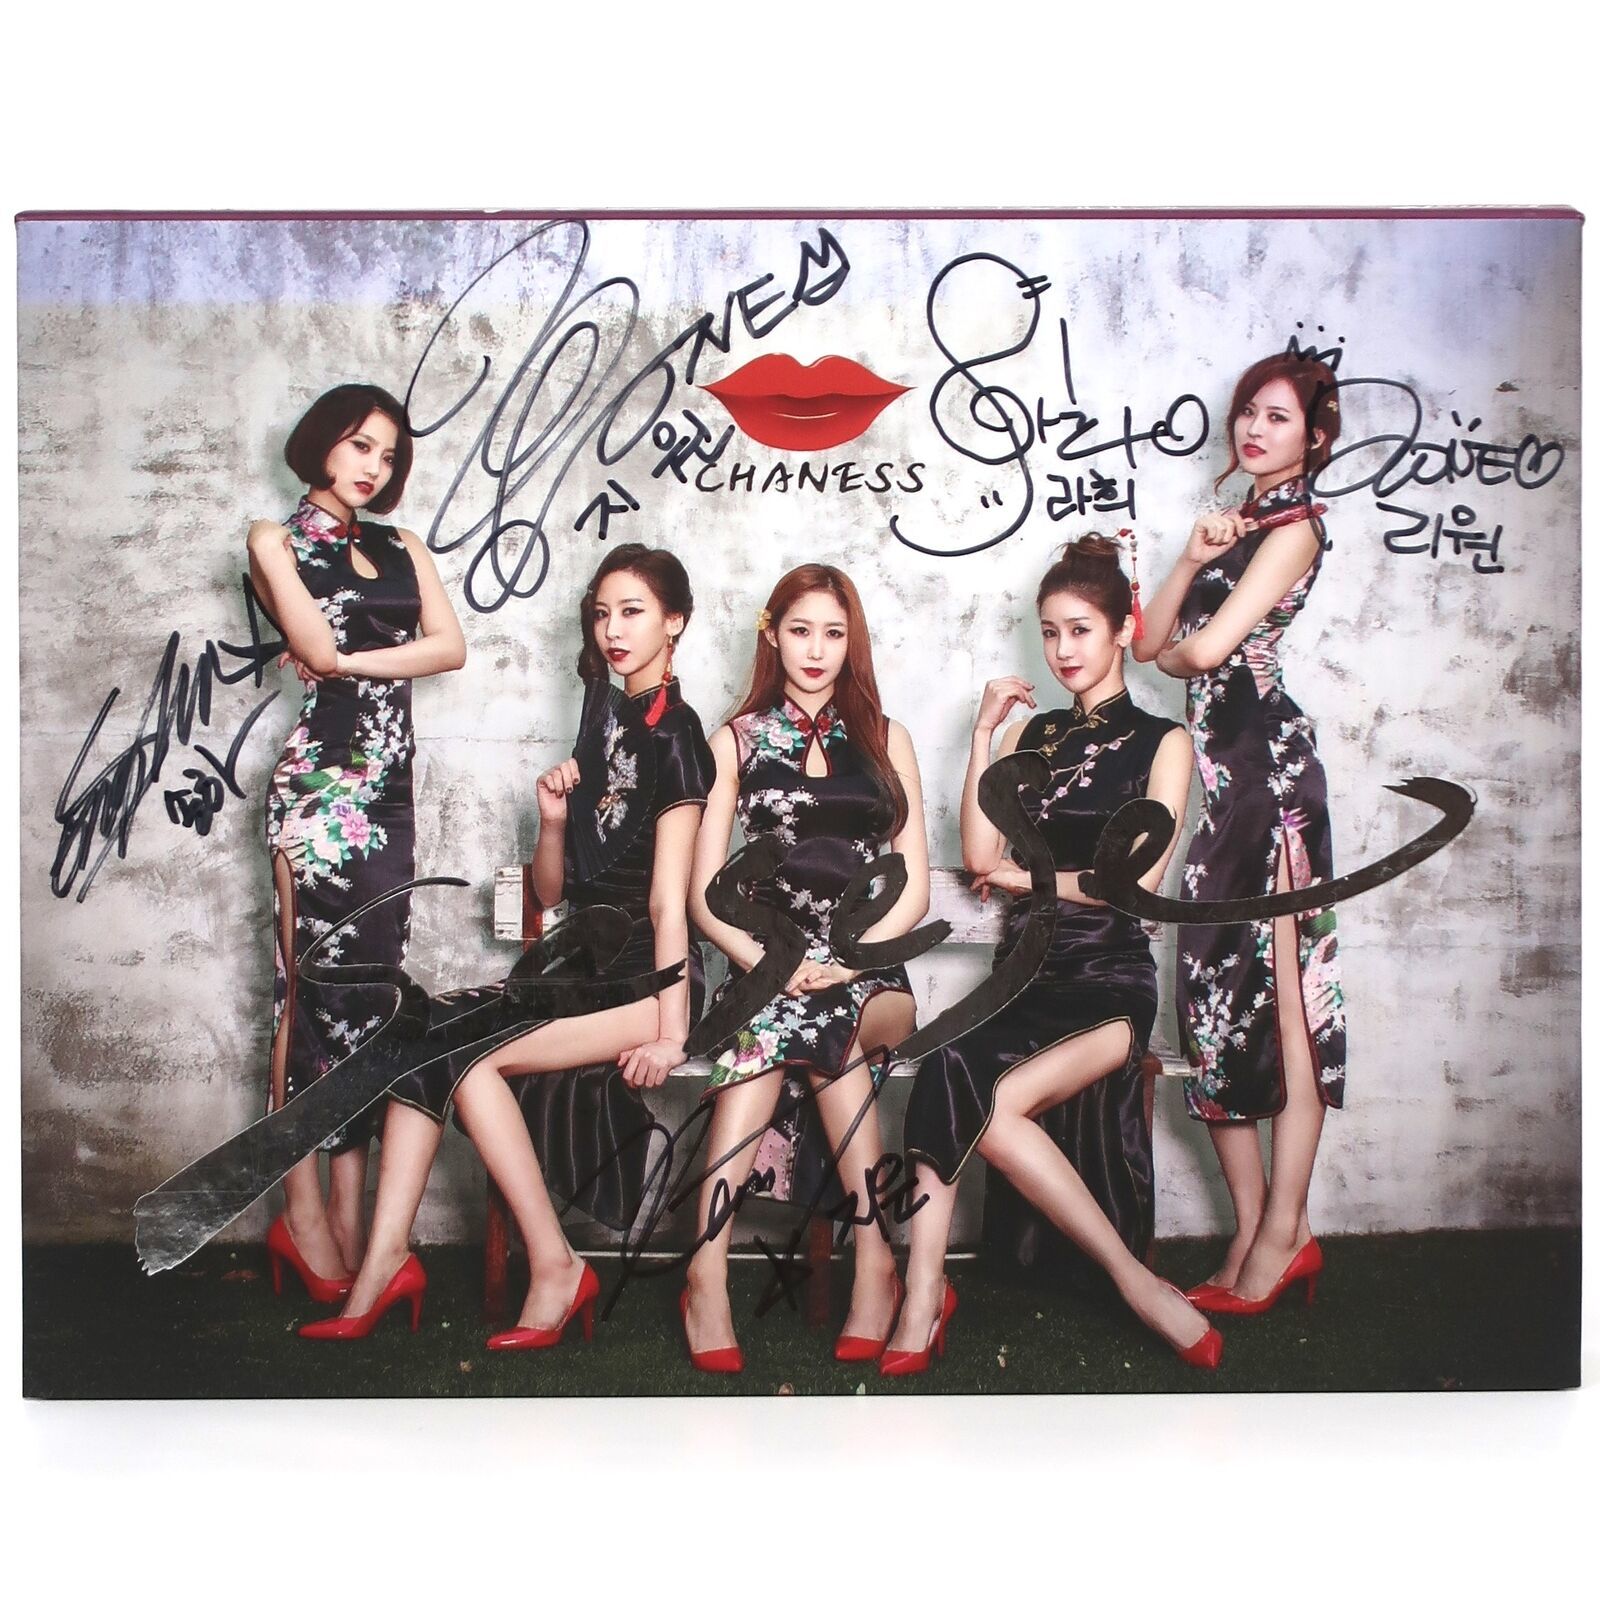 Primary image for Chaness - SeSeSe Signed Autographed CD Album Promo K-Pop 2014